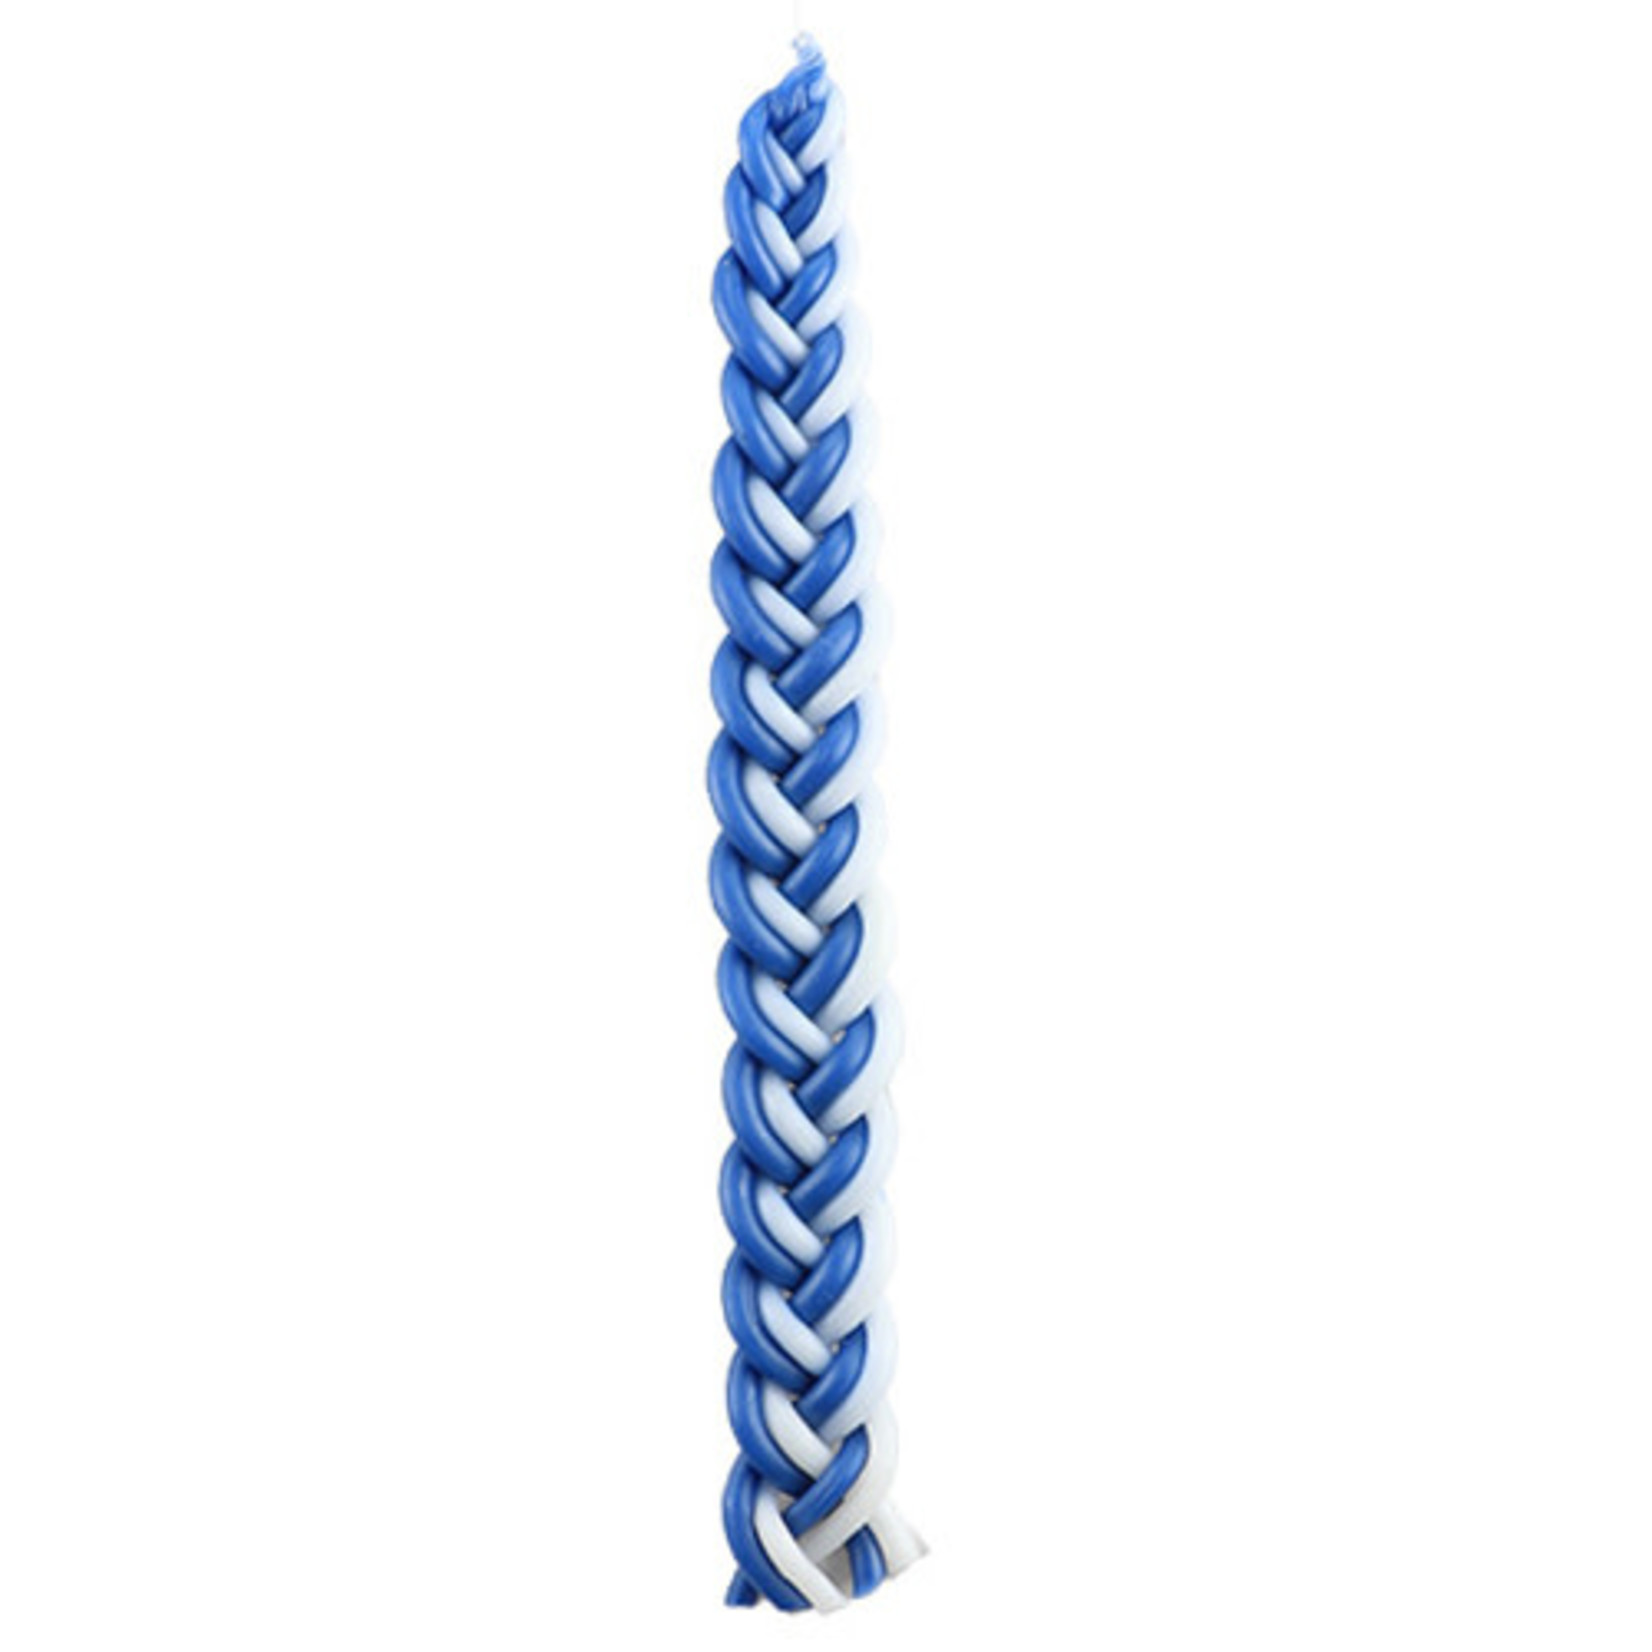 Braided Havdallah Candle, Blue and White